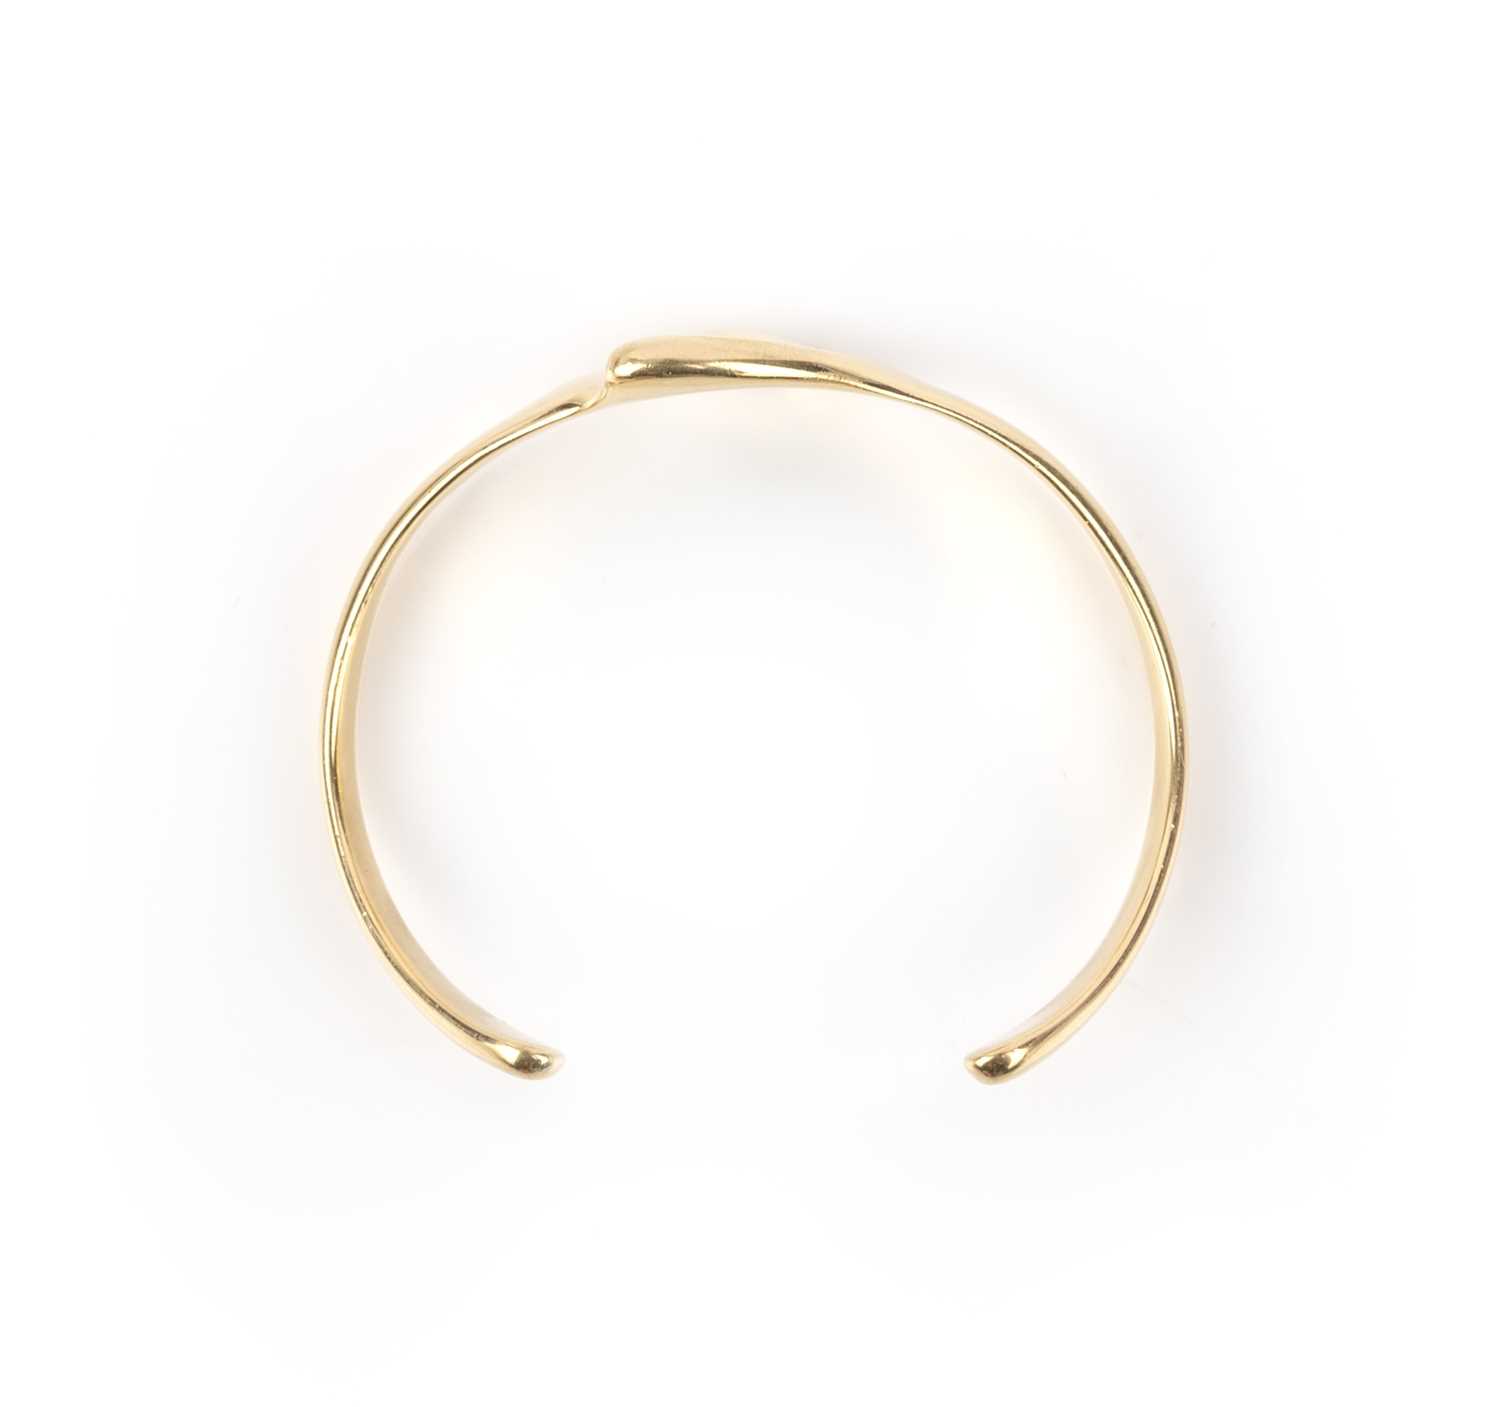 Elsa Peretti for Tiffany & Co, a gold bangle, designed as a stylised heart in polished yellow - Image 2 of 2